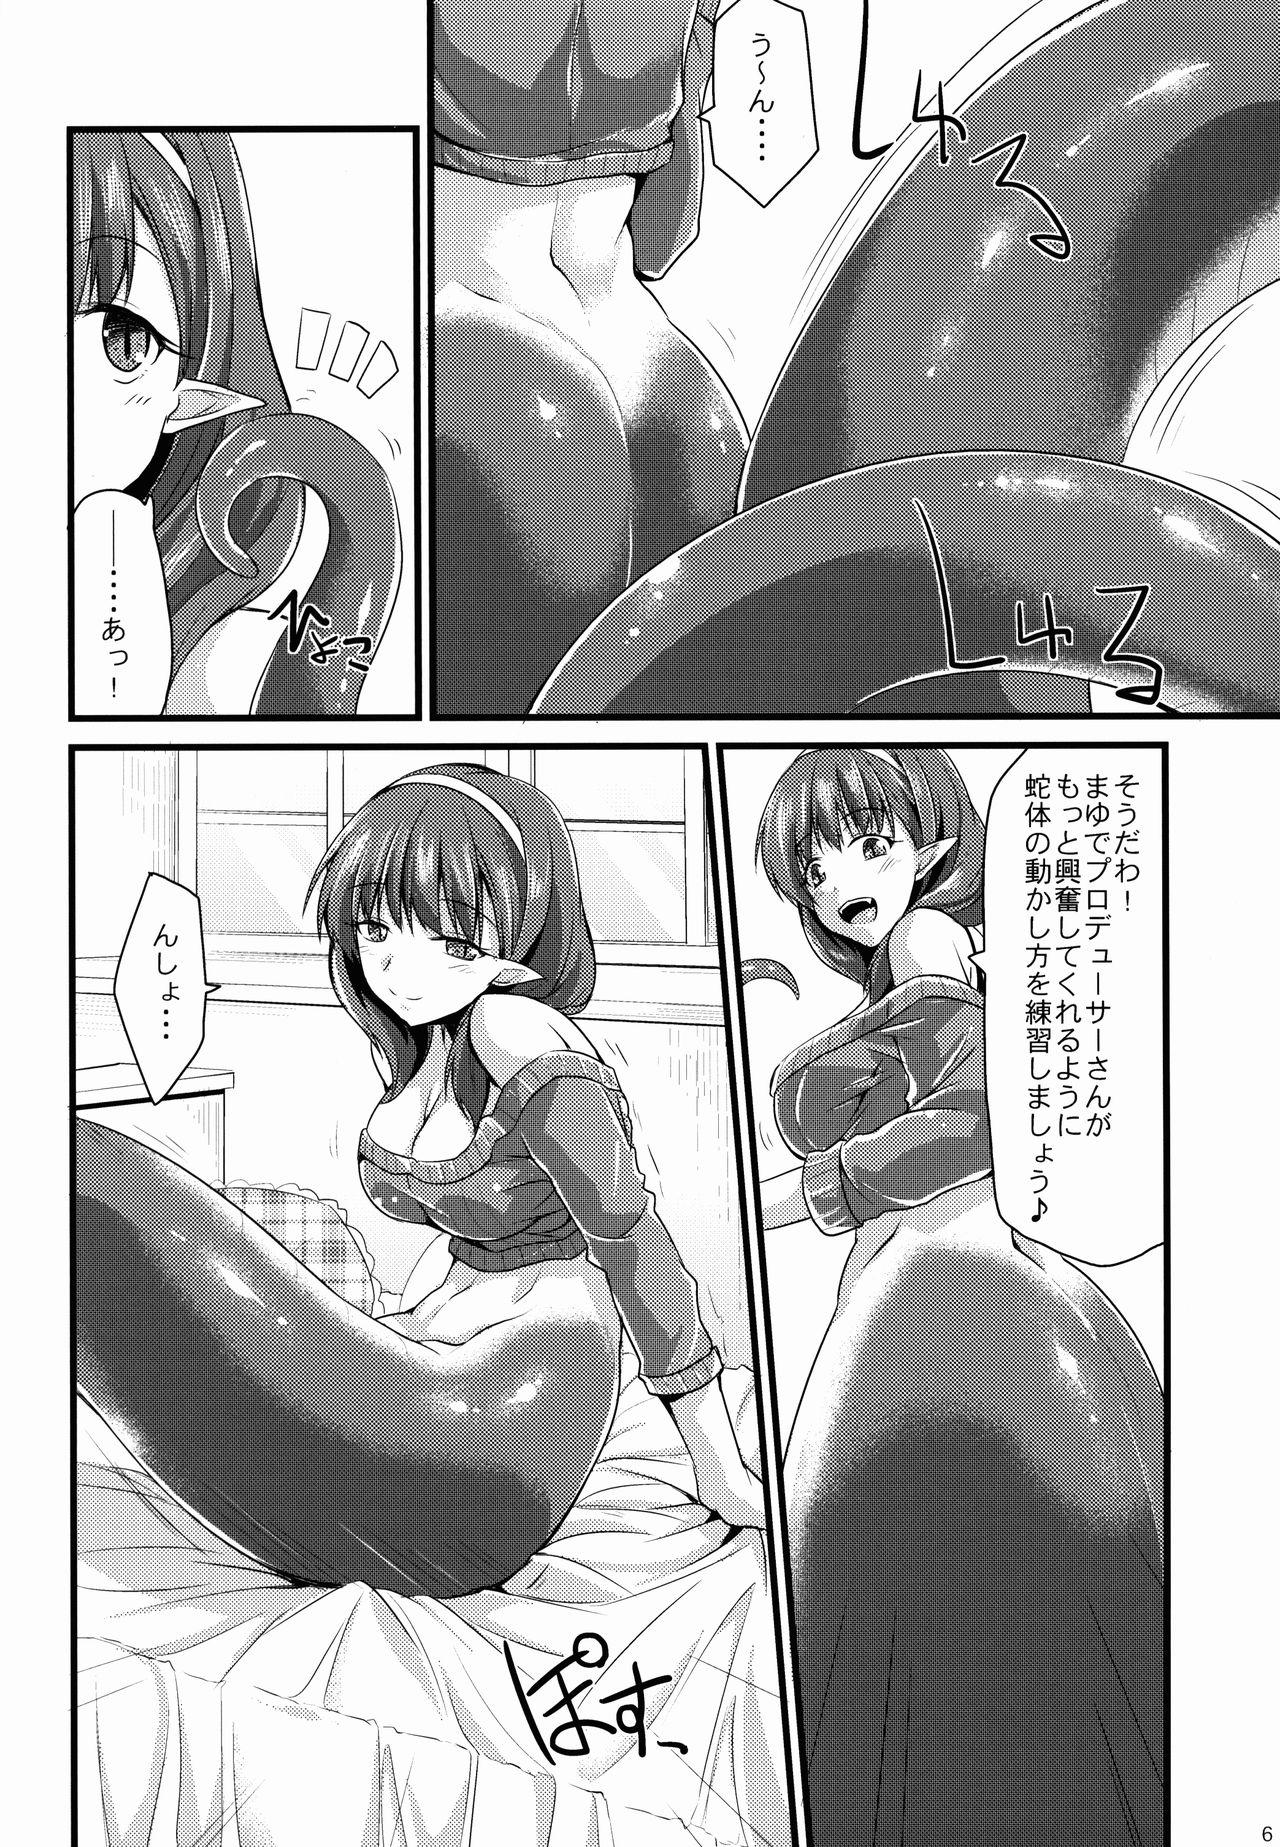 From 346 Jingai Production Mayu - The idolmaster Porn Star - Page 6